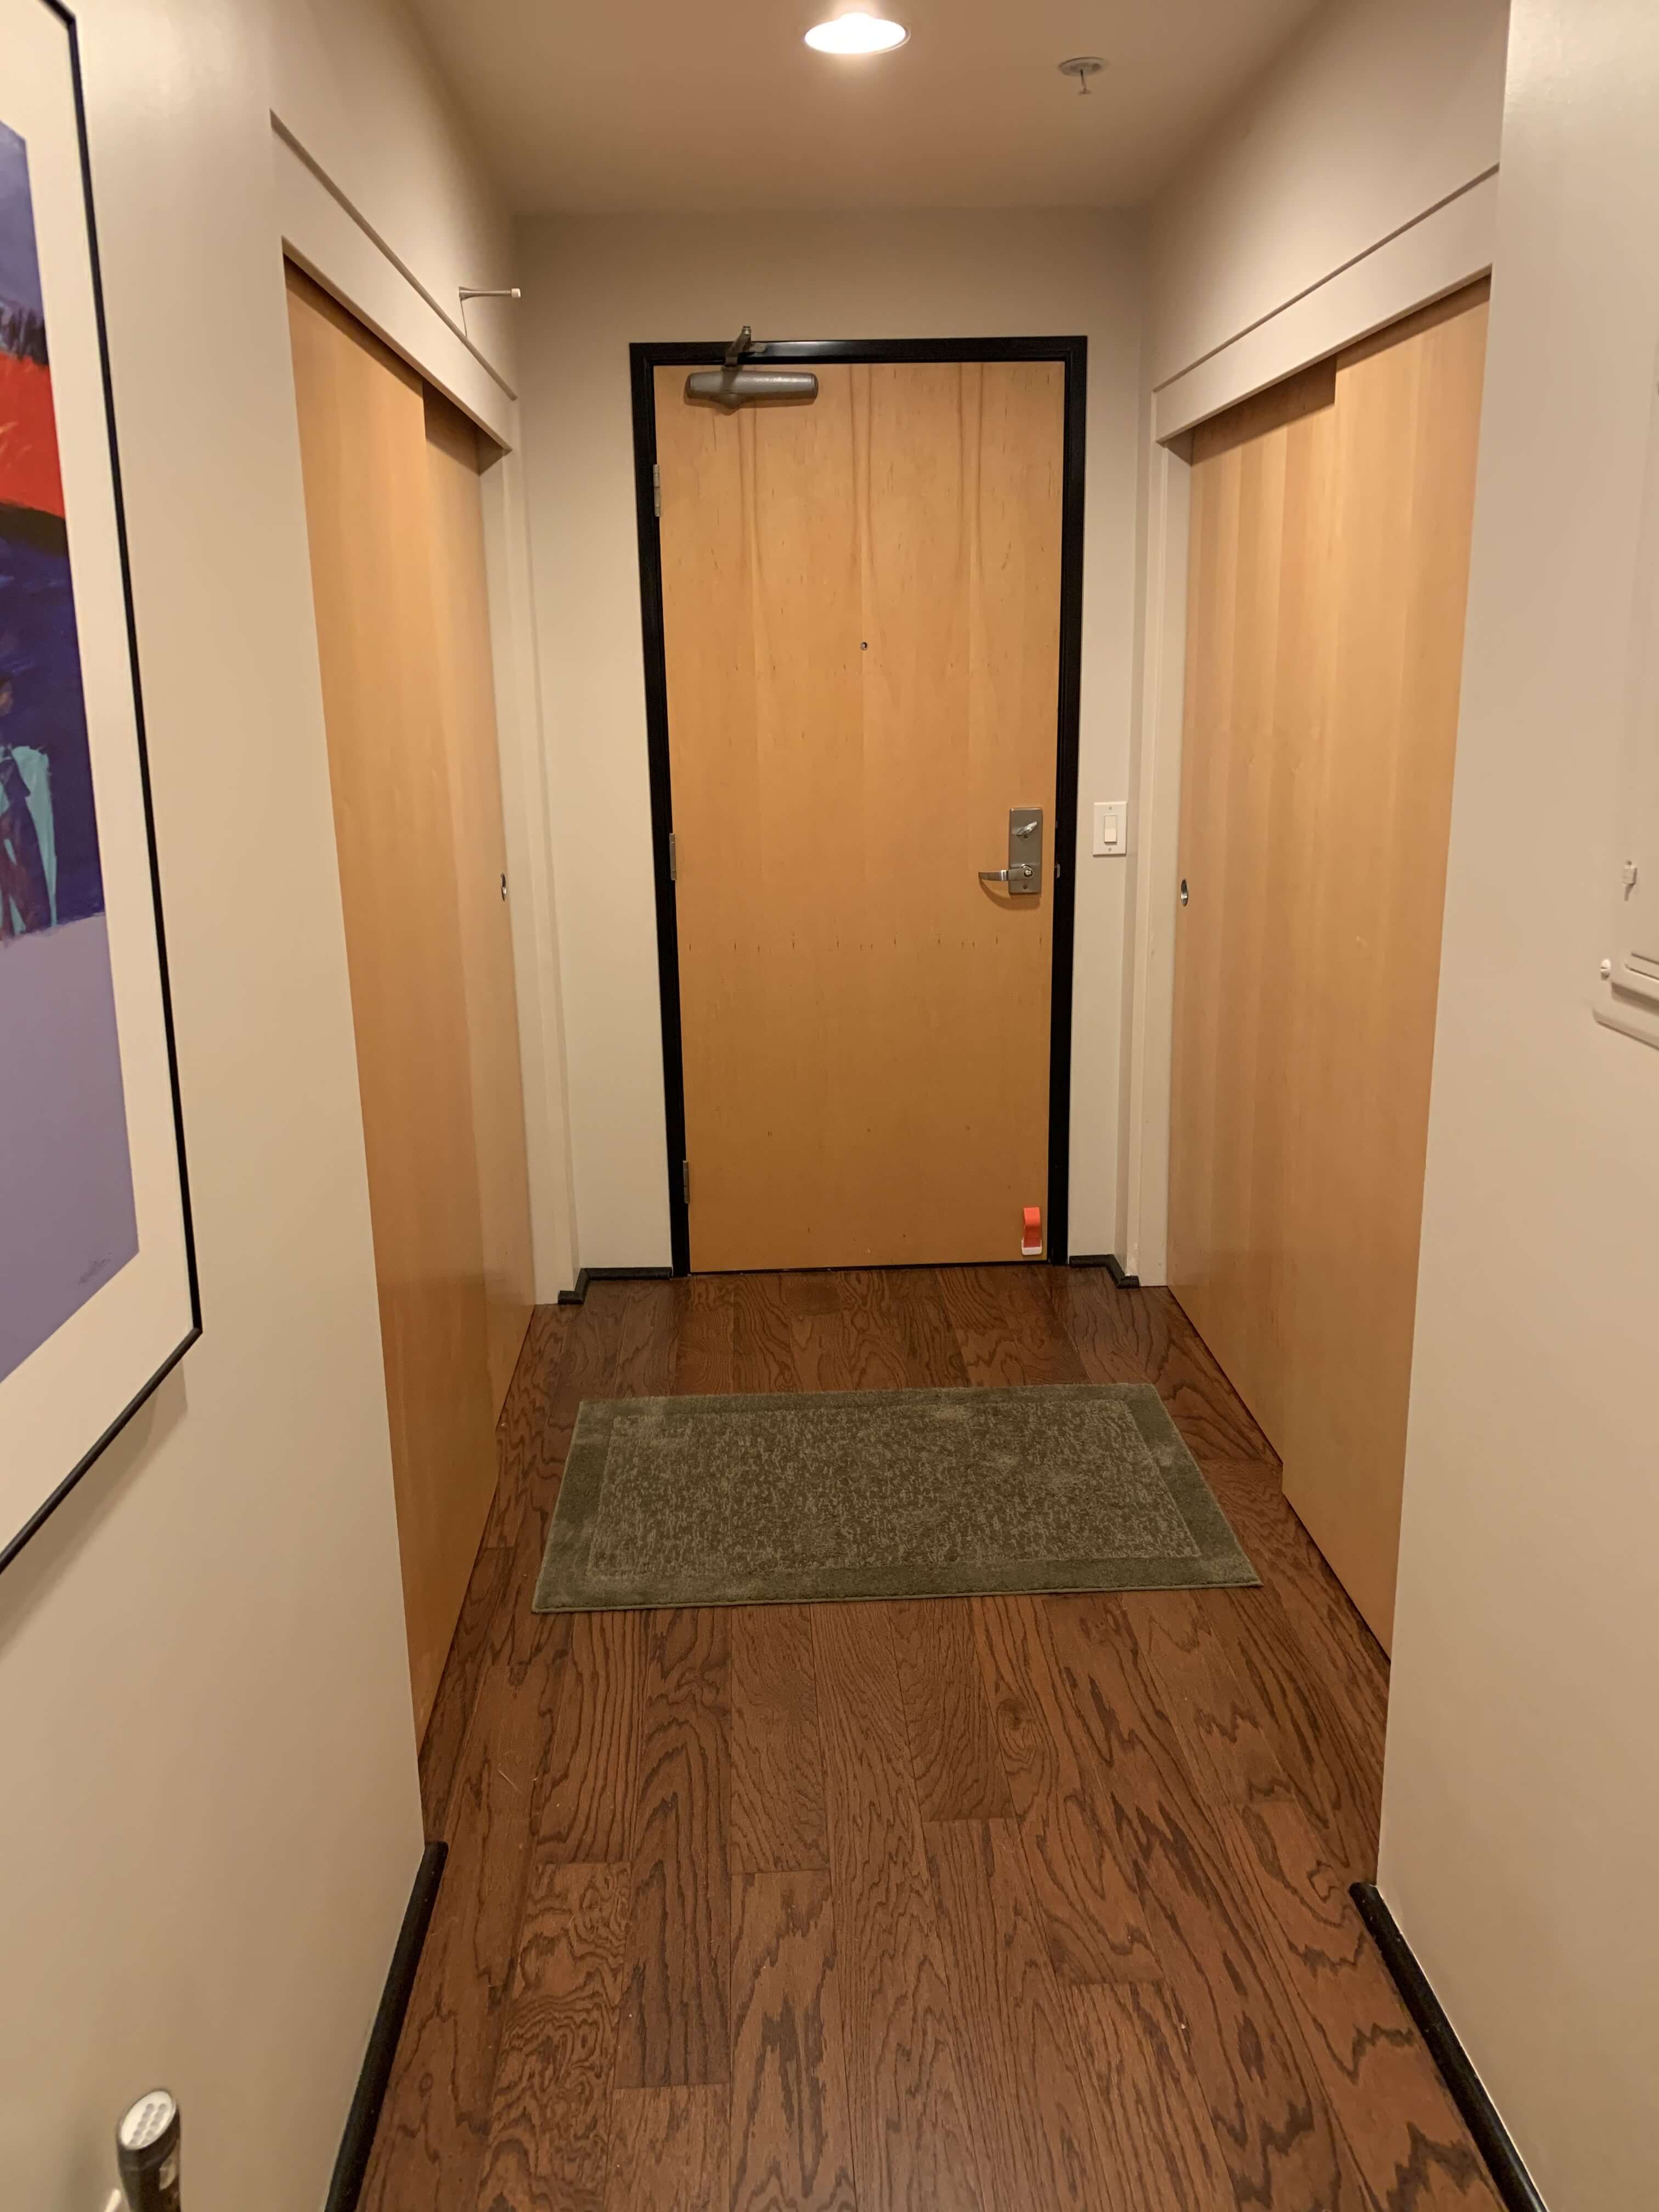 Entrance Door and Closets - Utilities on Left